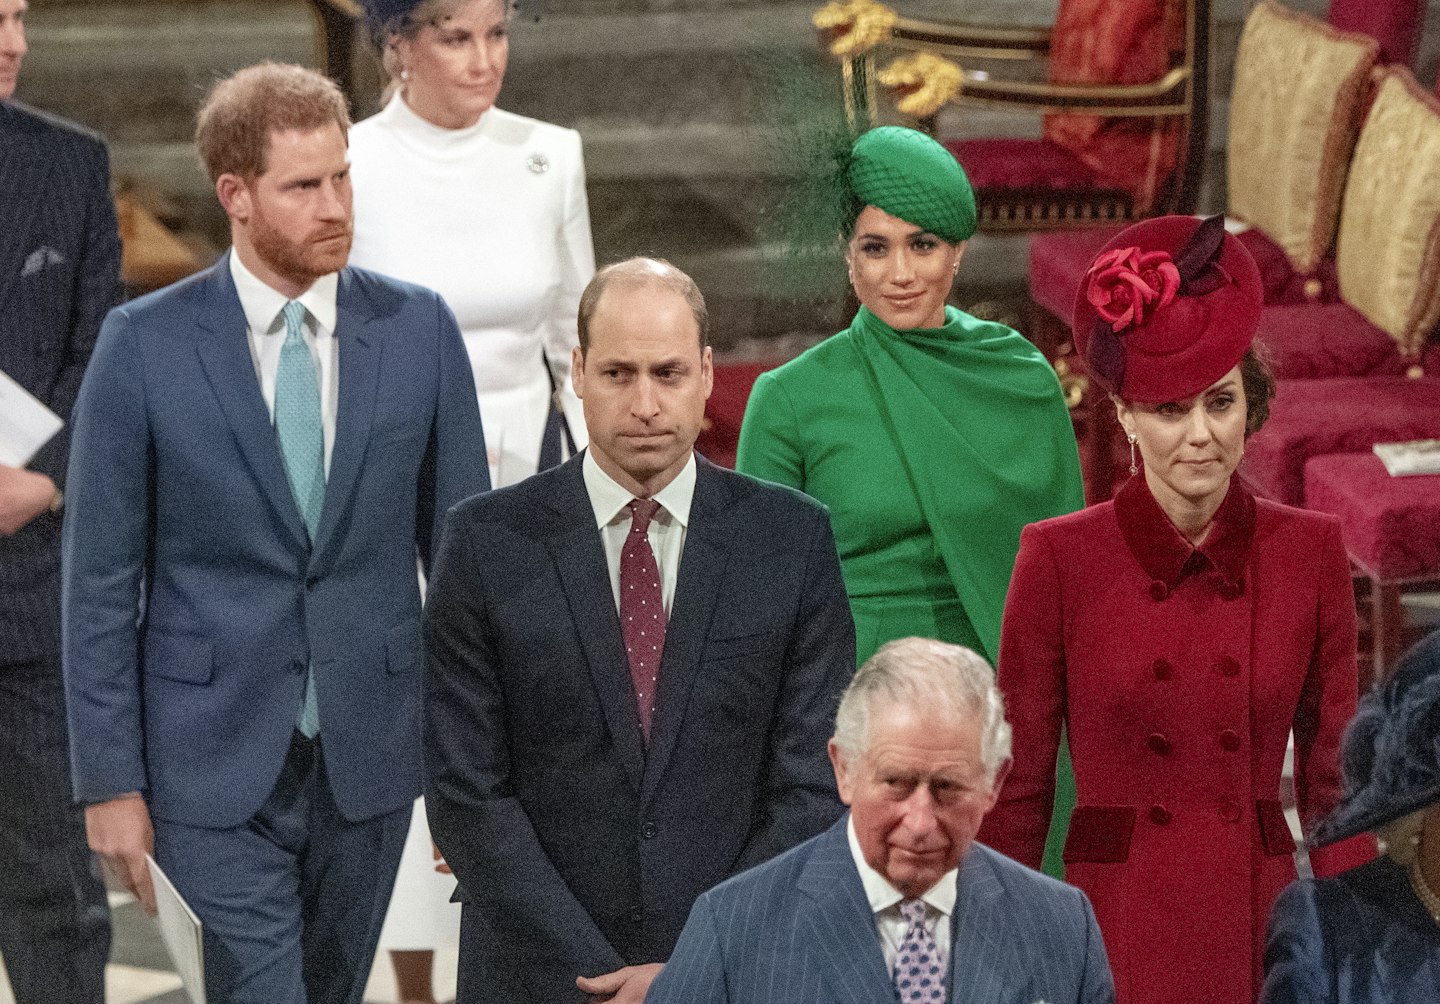 The Duke and Duchess of Cambridge and the Duke and Duchess of Sussex at the Commonwealth Ceremony